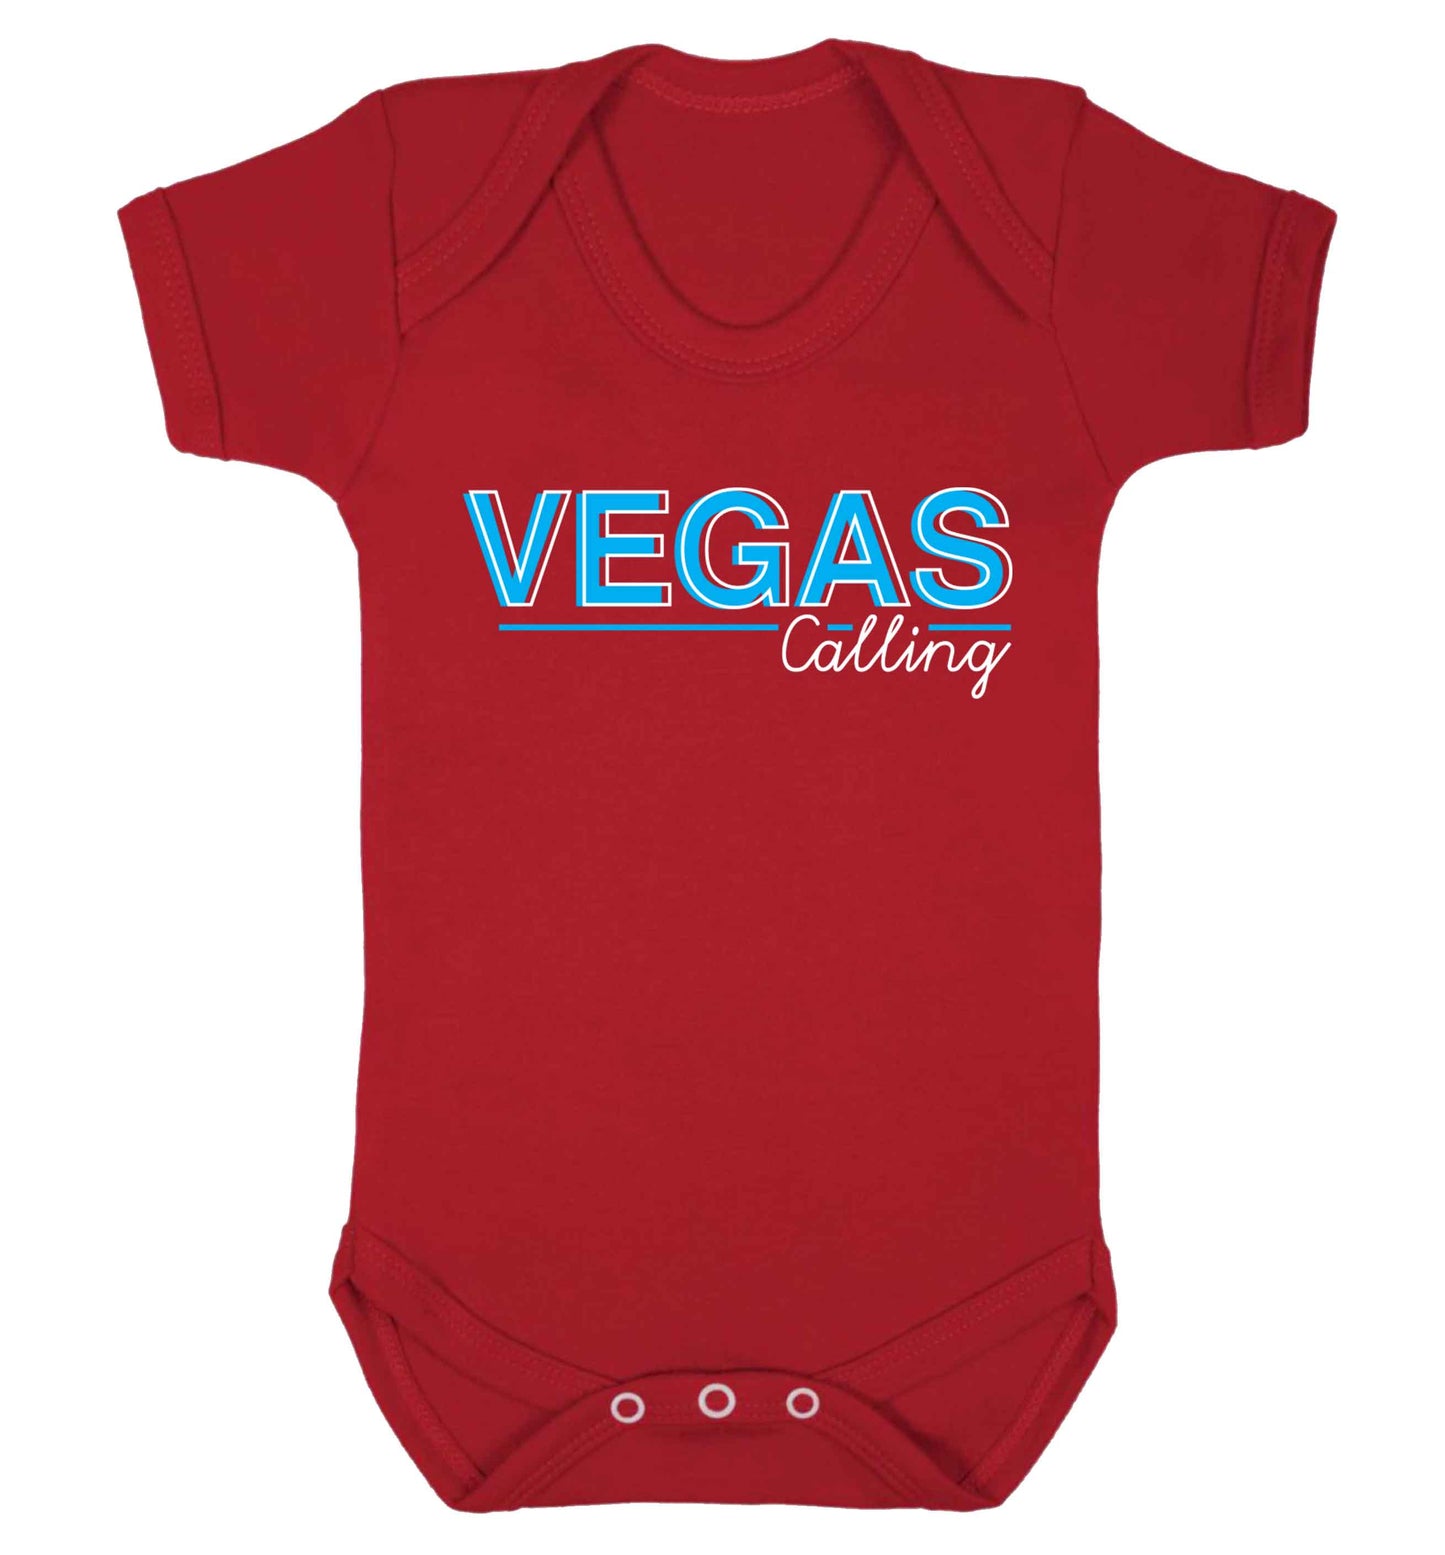 Vegas calling Baby Vest red 18-24 months